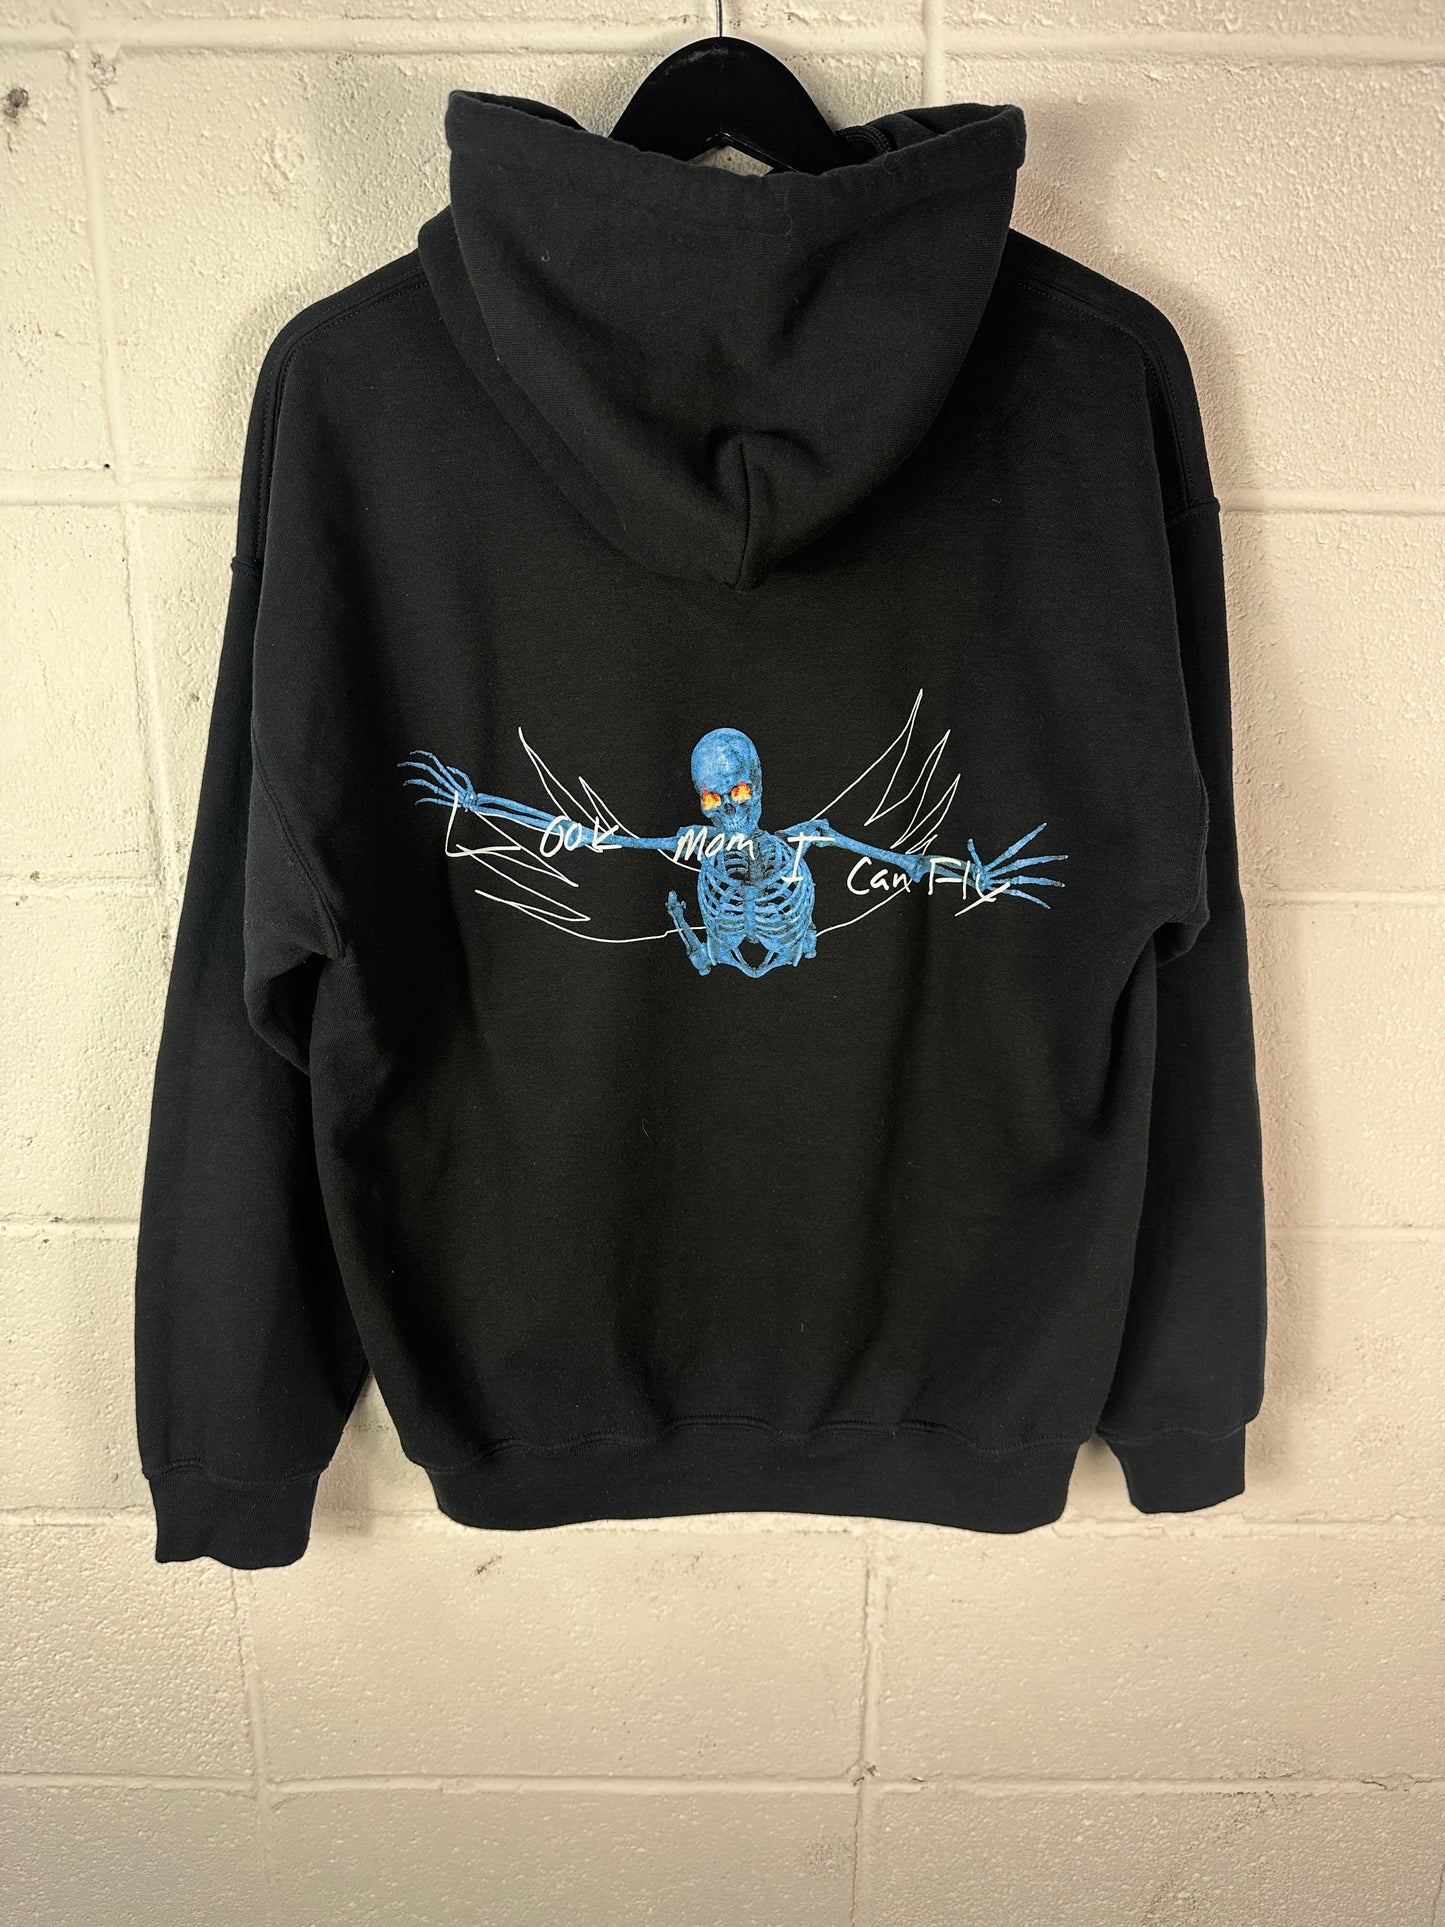 Preowned Travis Scott Look Mom I Can Fly Hoodie Sz Med